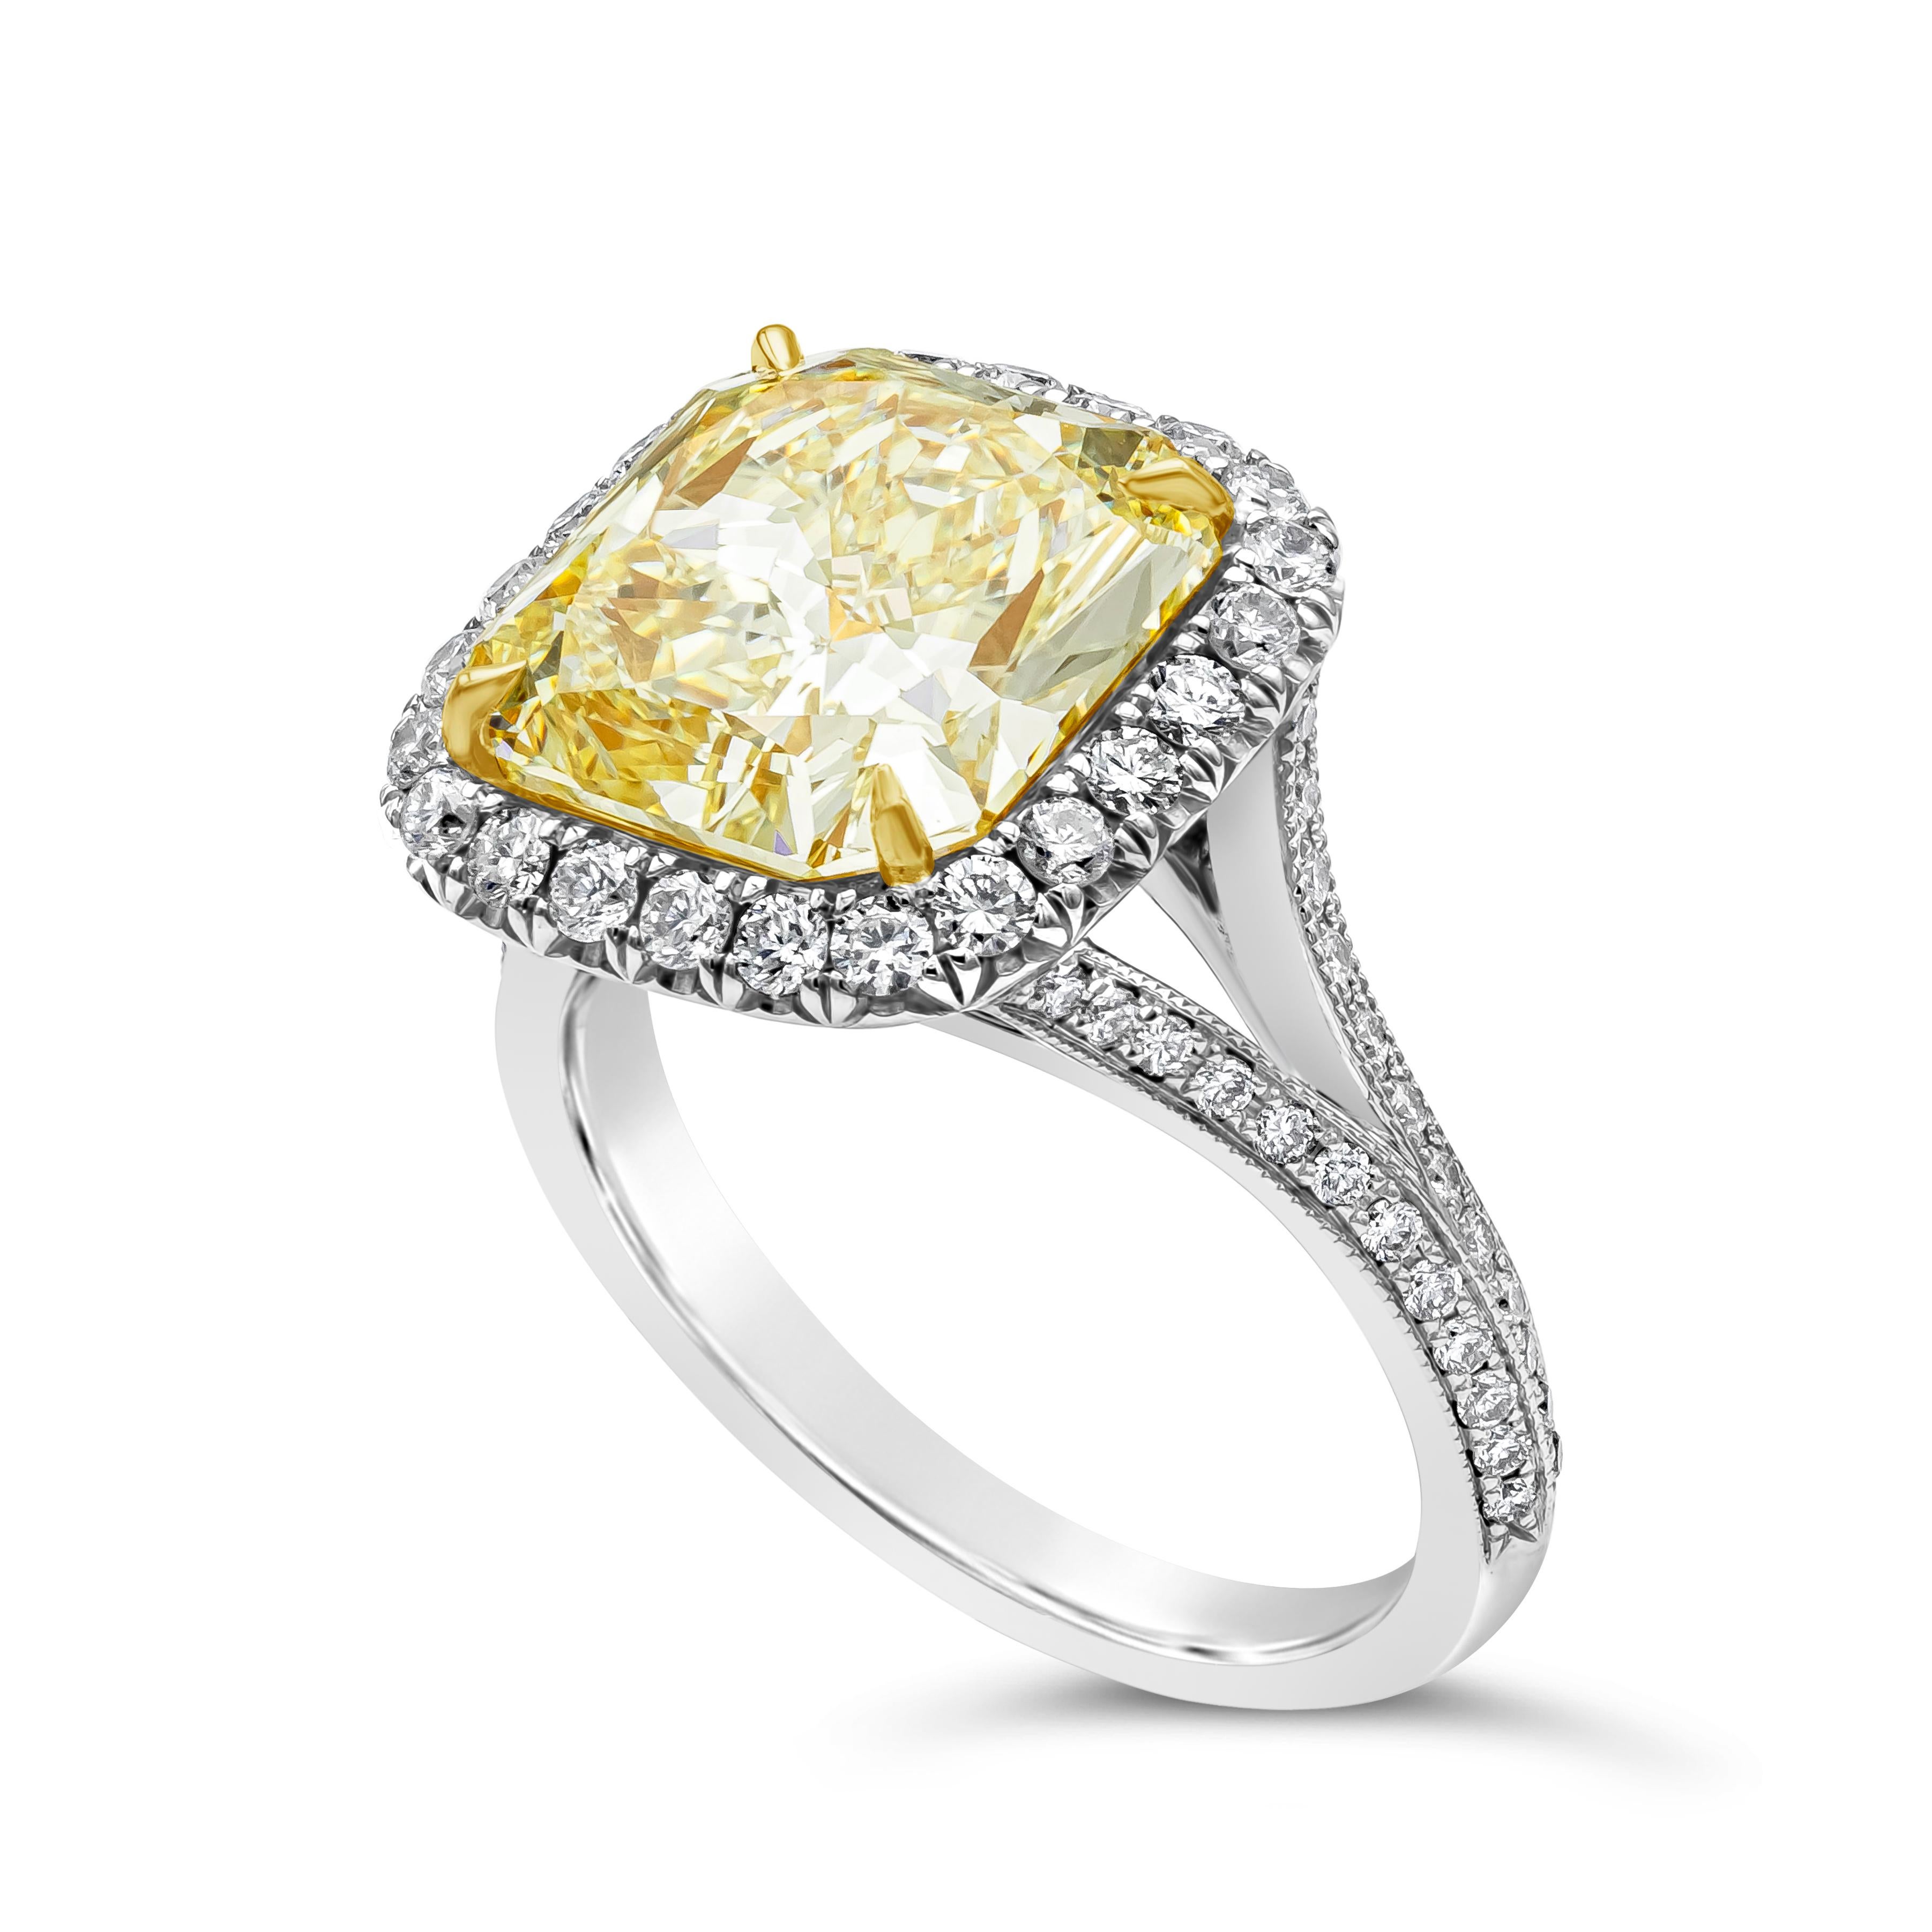 Features a GIA Certified color-rich radiant cut fancy yellow diamond weighing 5.32 carat and VS1 in clarity. Set in a yellow gold four prong setting. Surrounded by a single row of round brilliant diamonds weighing 0.85 carats total, G color, VS2 in